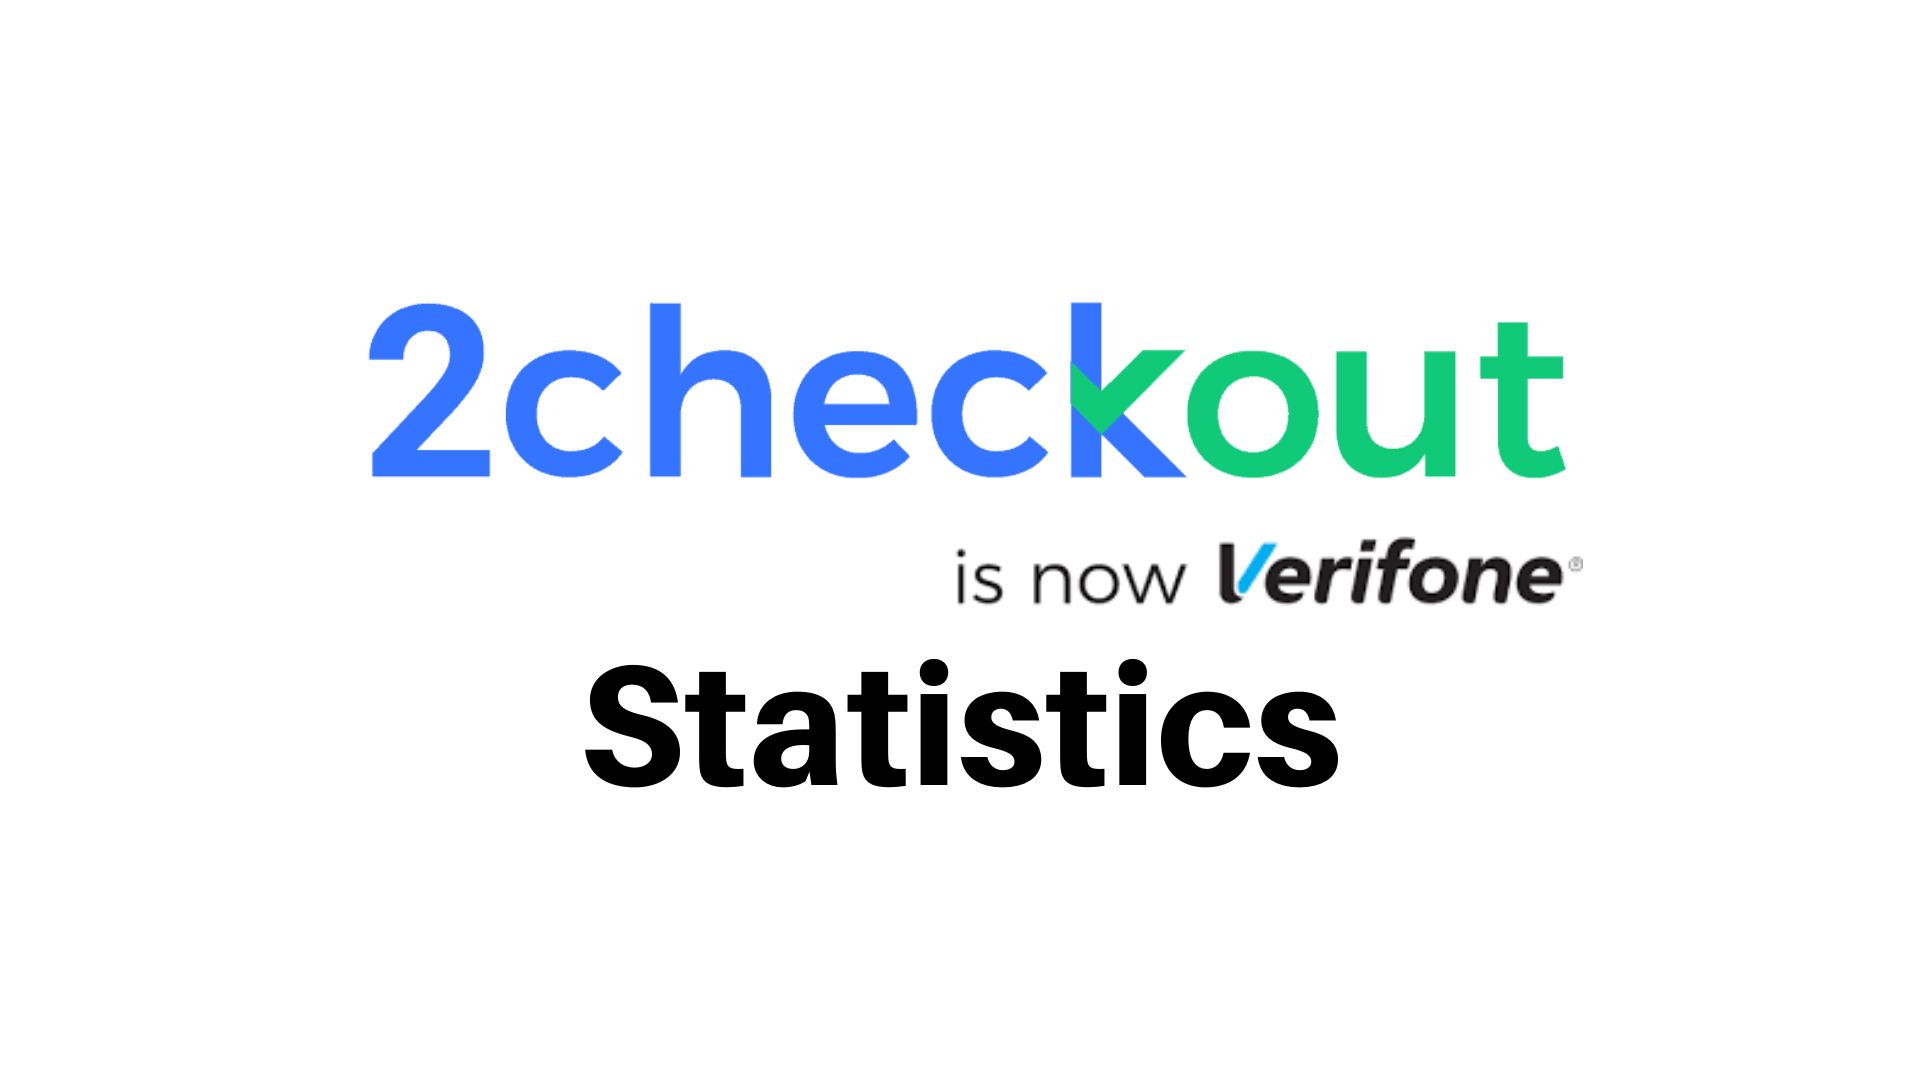 2Checkout Statistics (Now Verifone) – Reviews, Usage, Features and Market Share